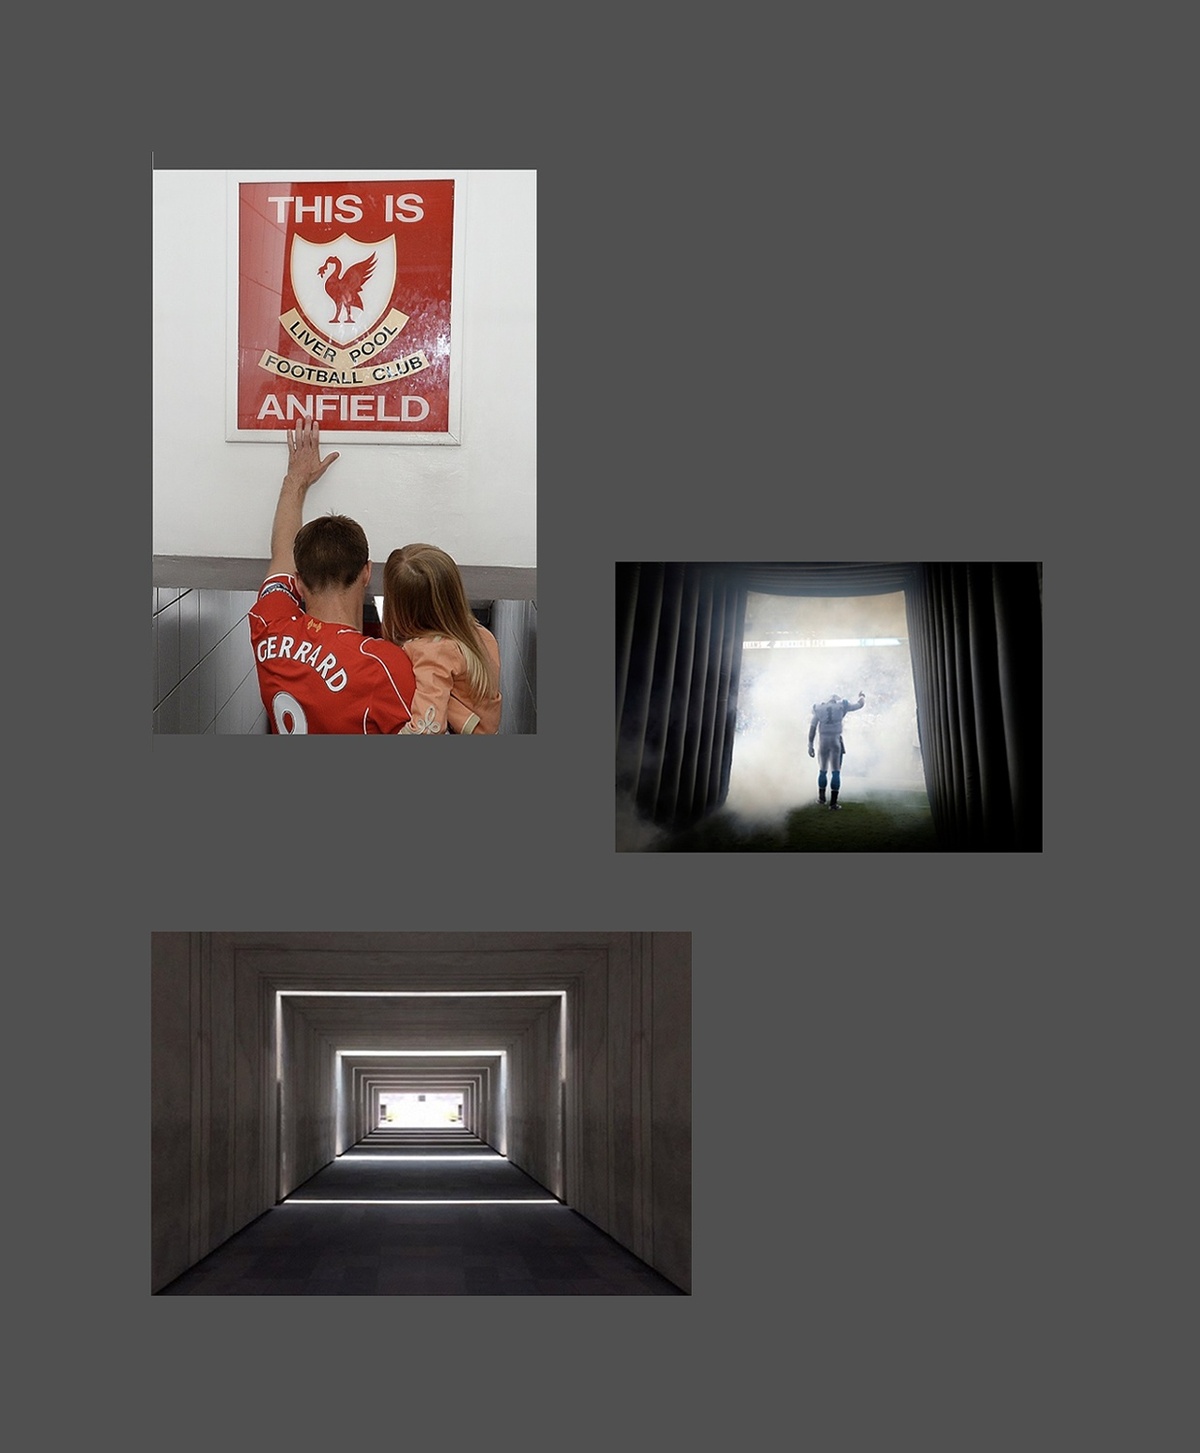 Moodboard of Liverpool fan touching the Ansfield sign, a football player walking into the stadium, and an reference piece of lighting design